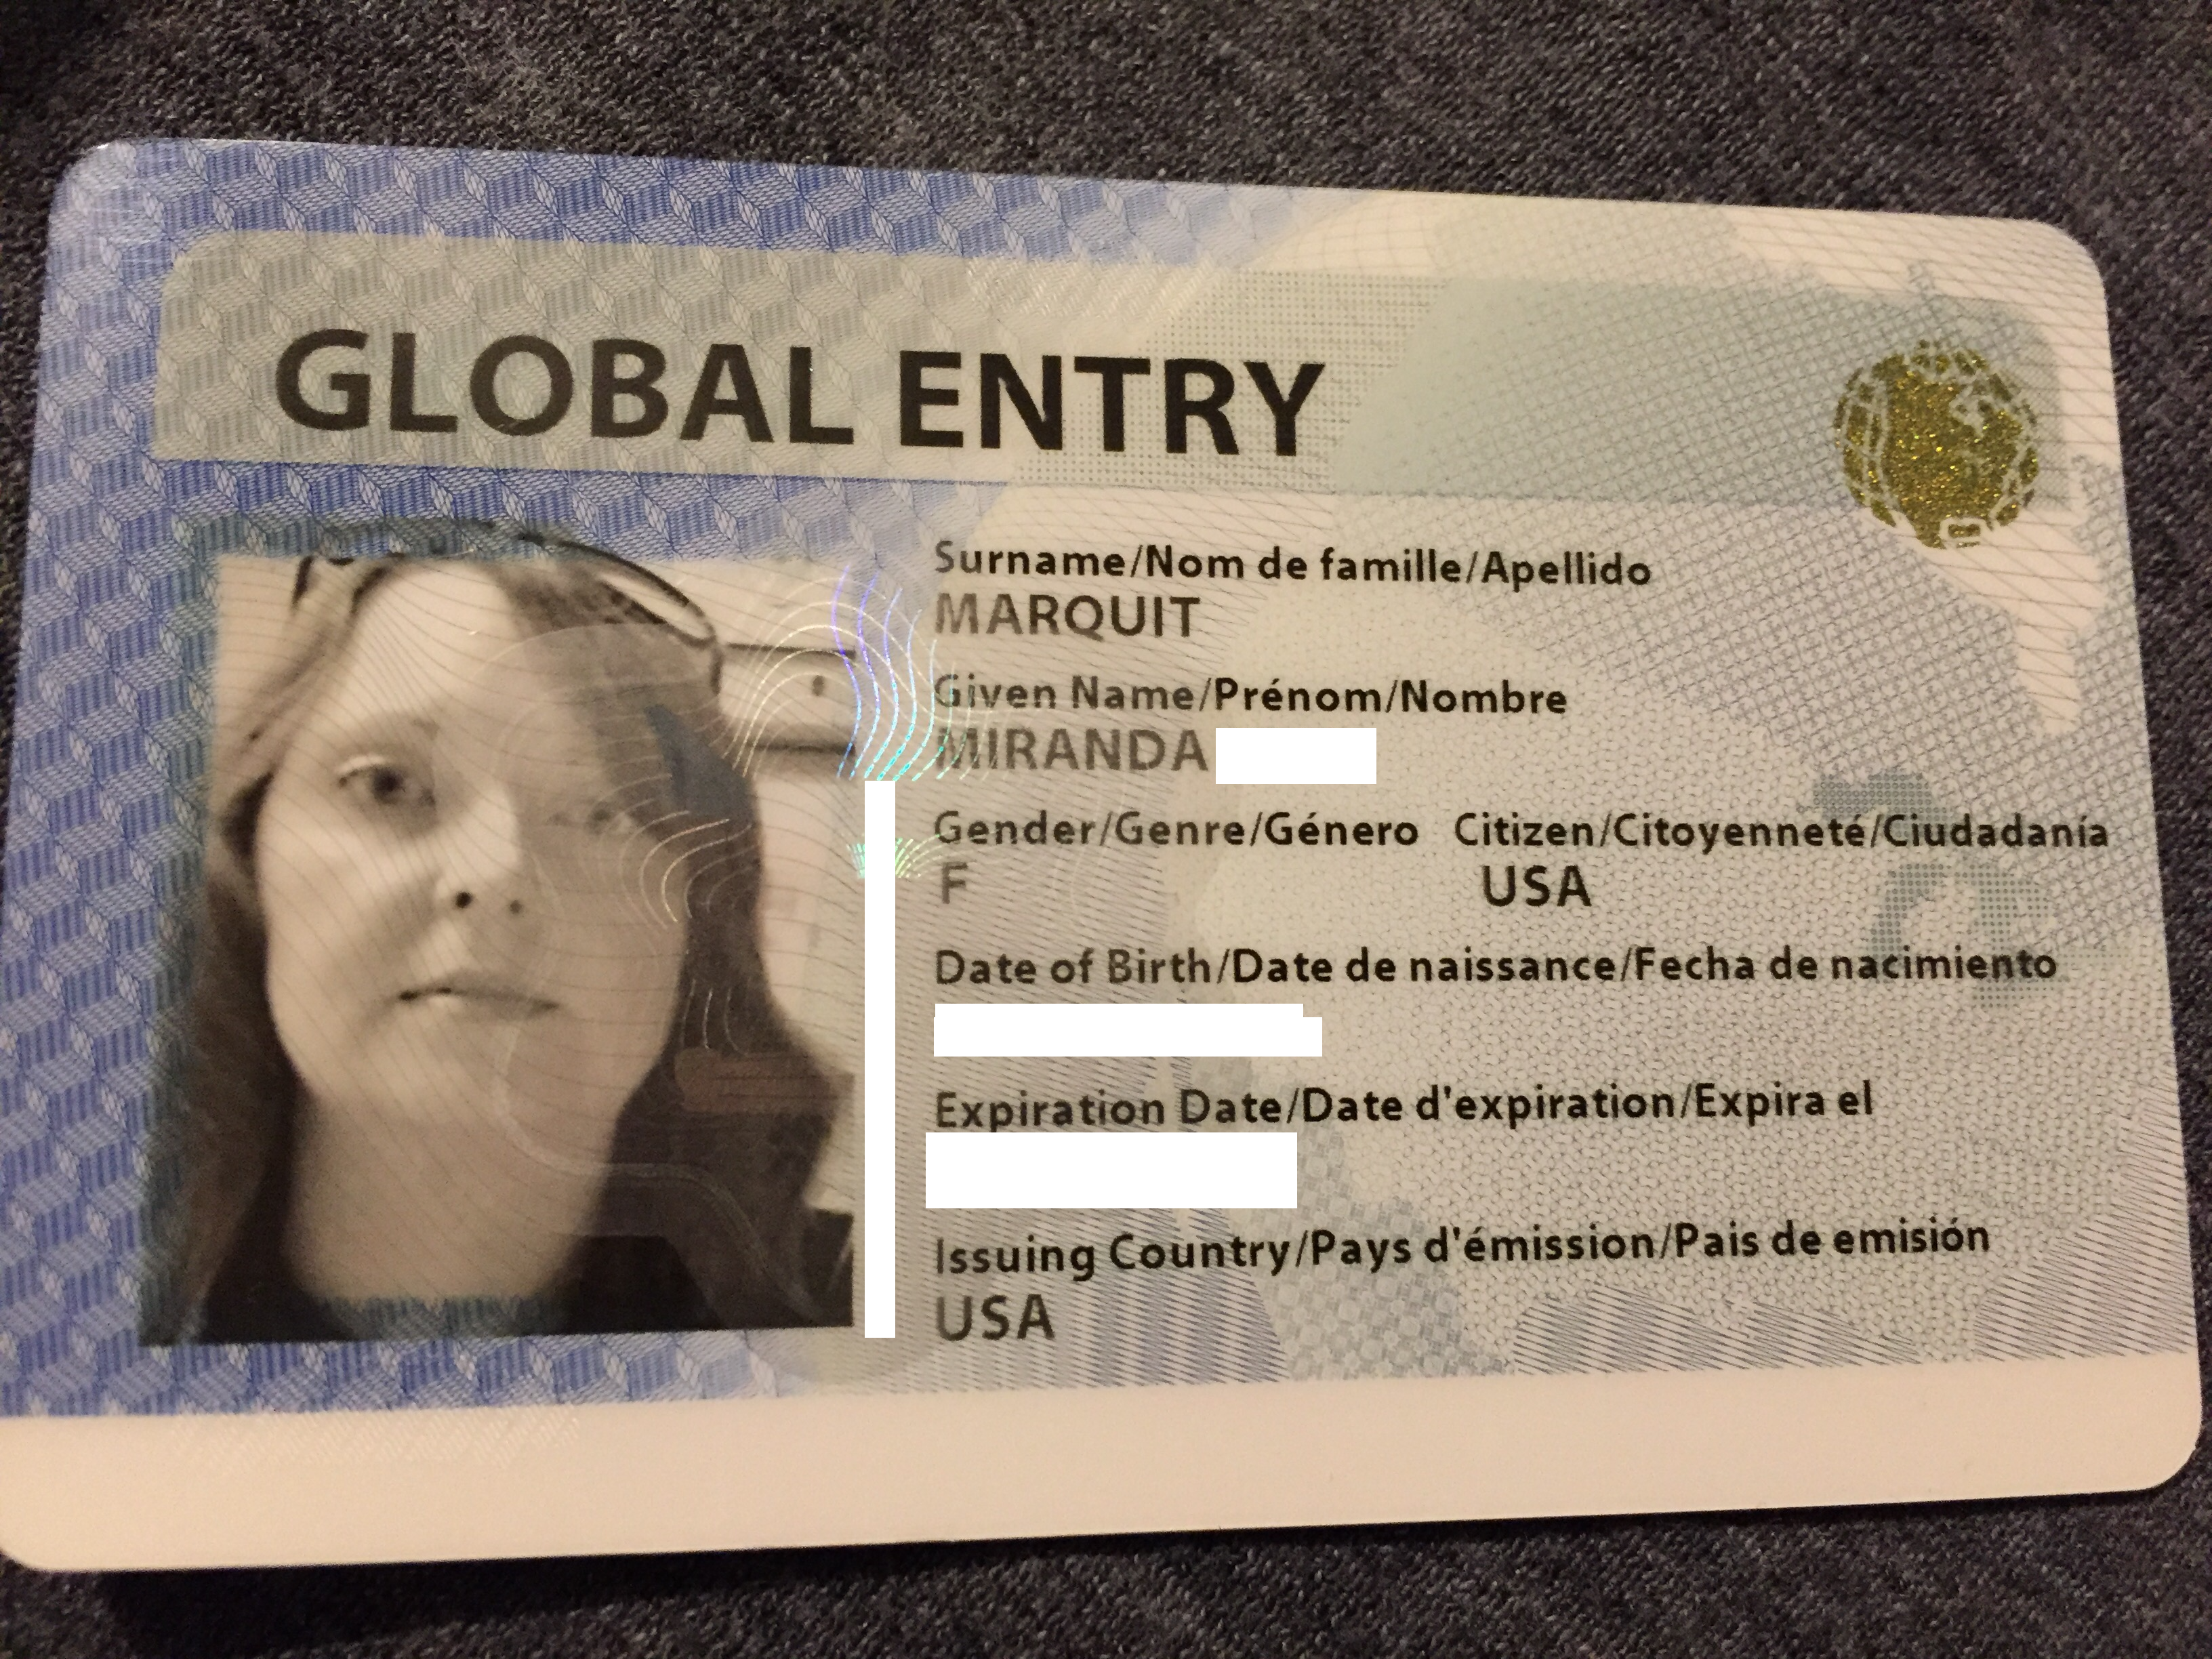 travel card with global entry